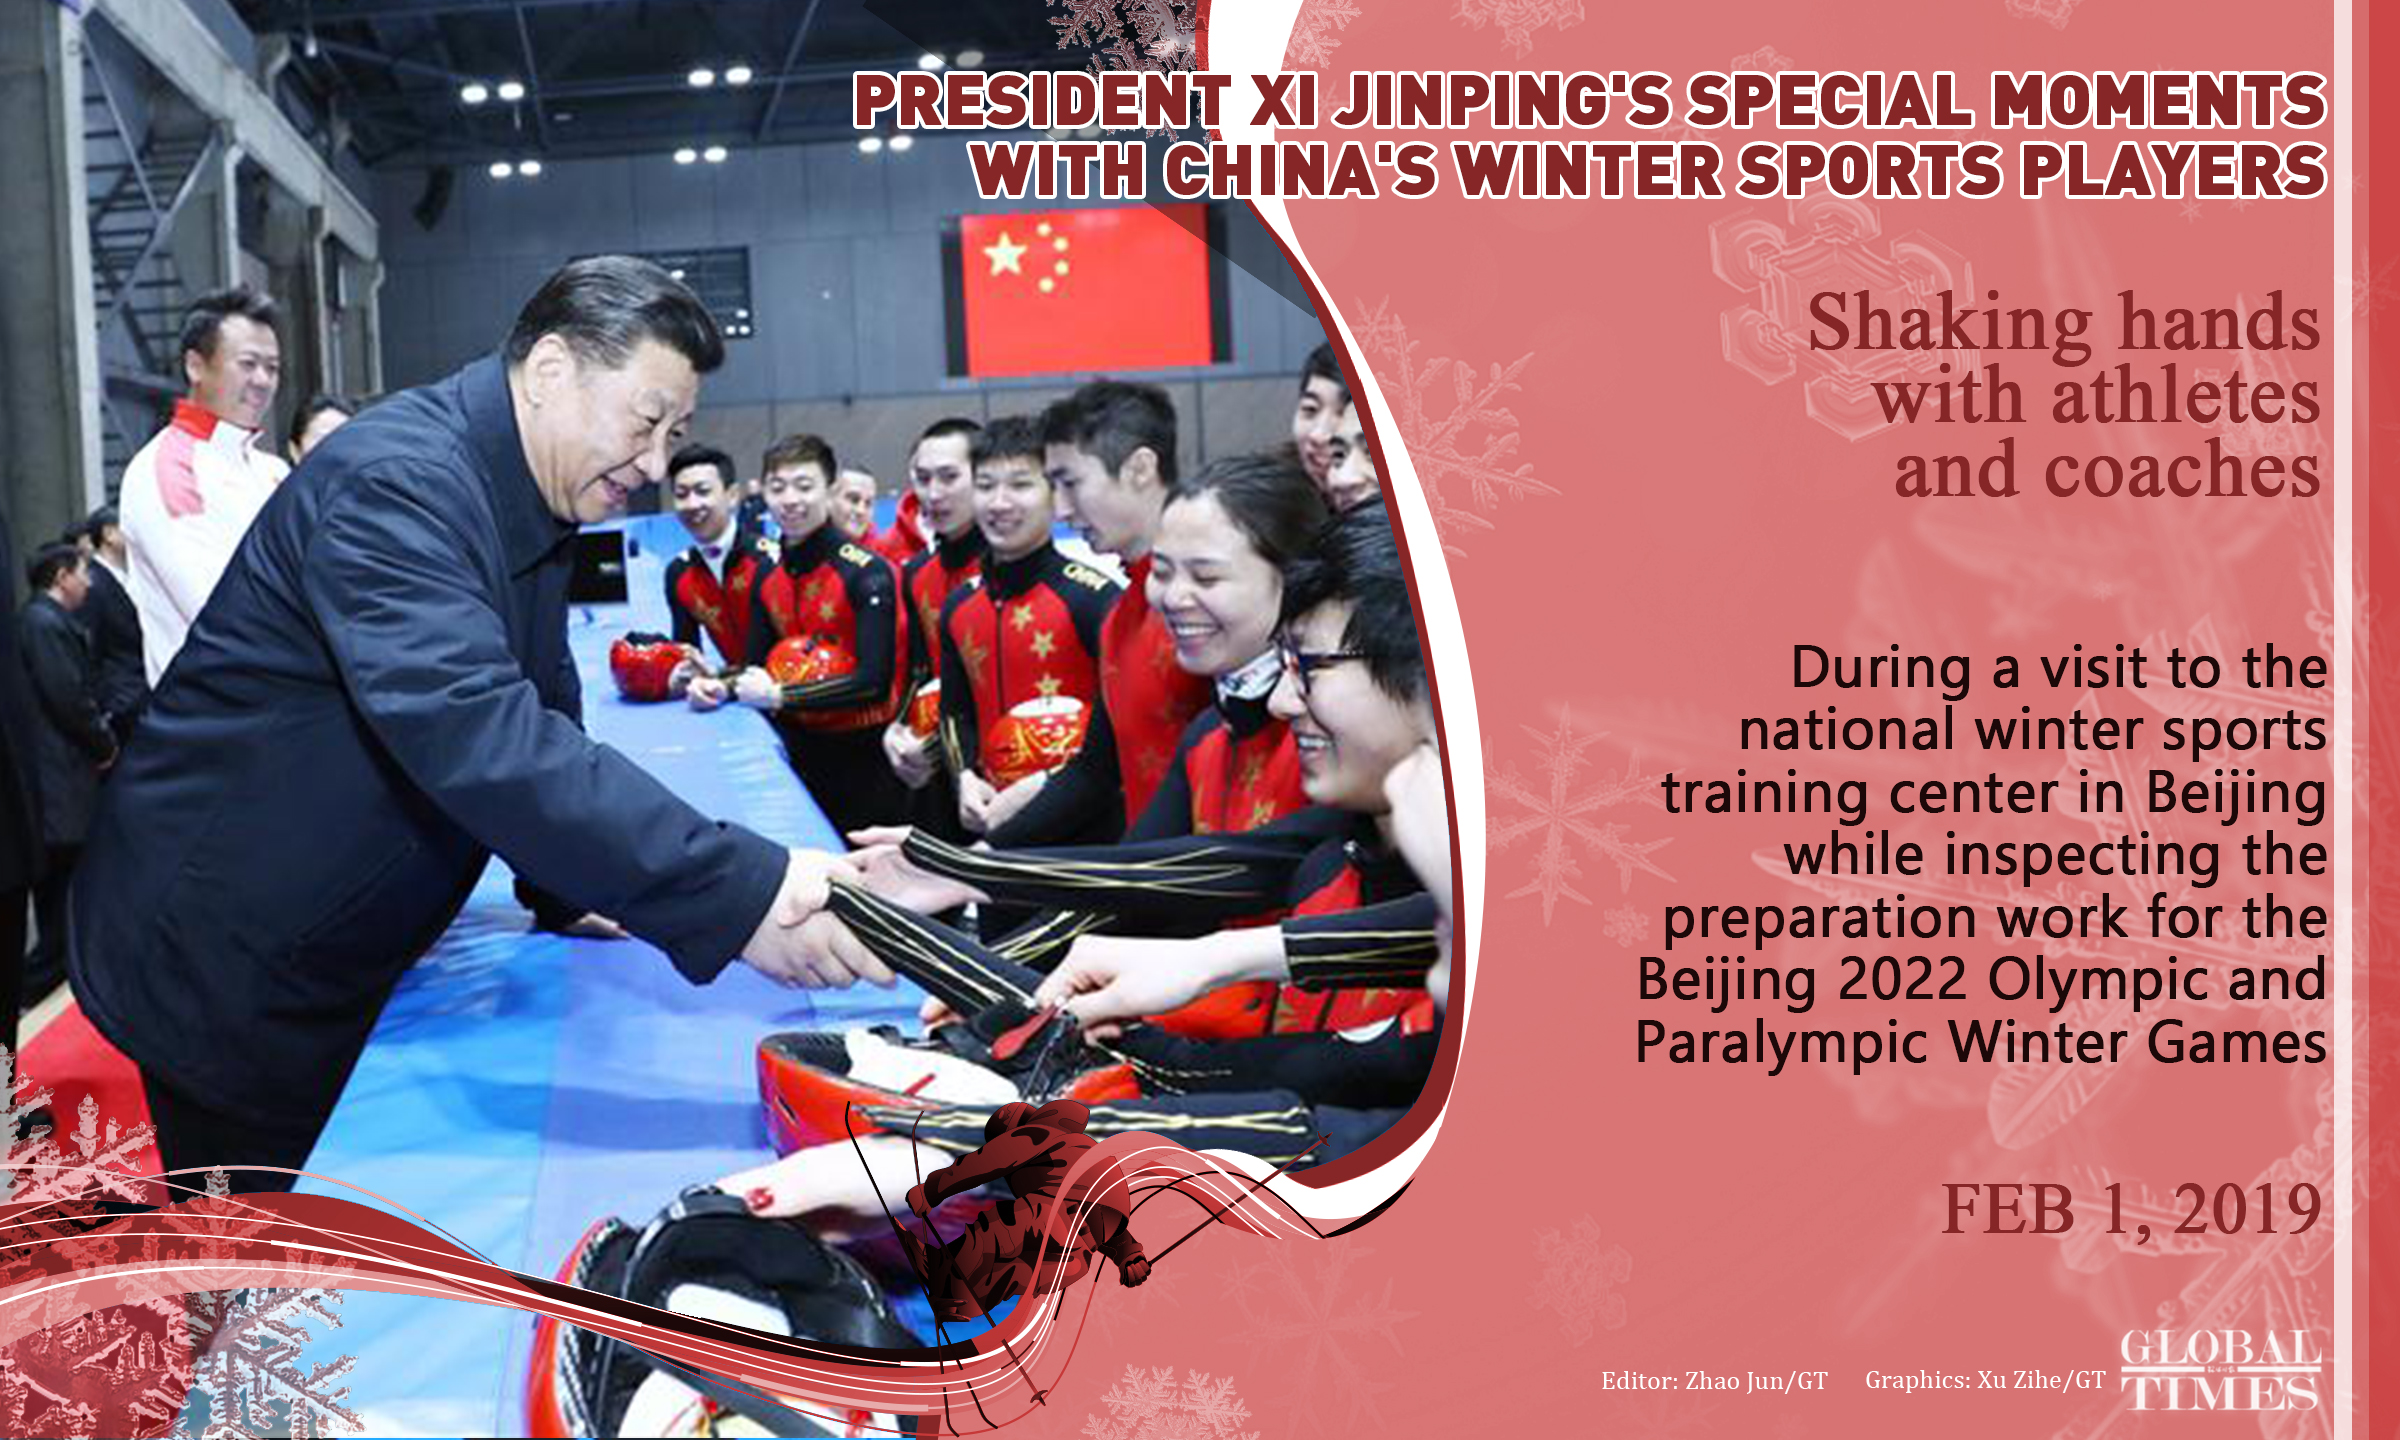 President Xi Jinping's special moments with China's winter sports players. Graphic: Xu Zihe/GT